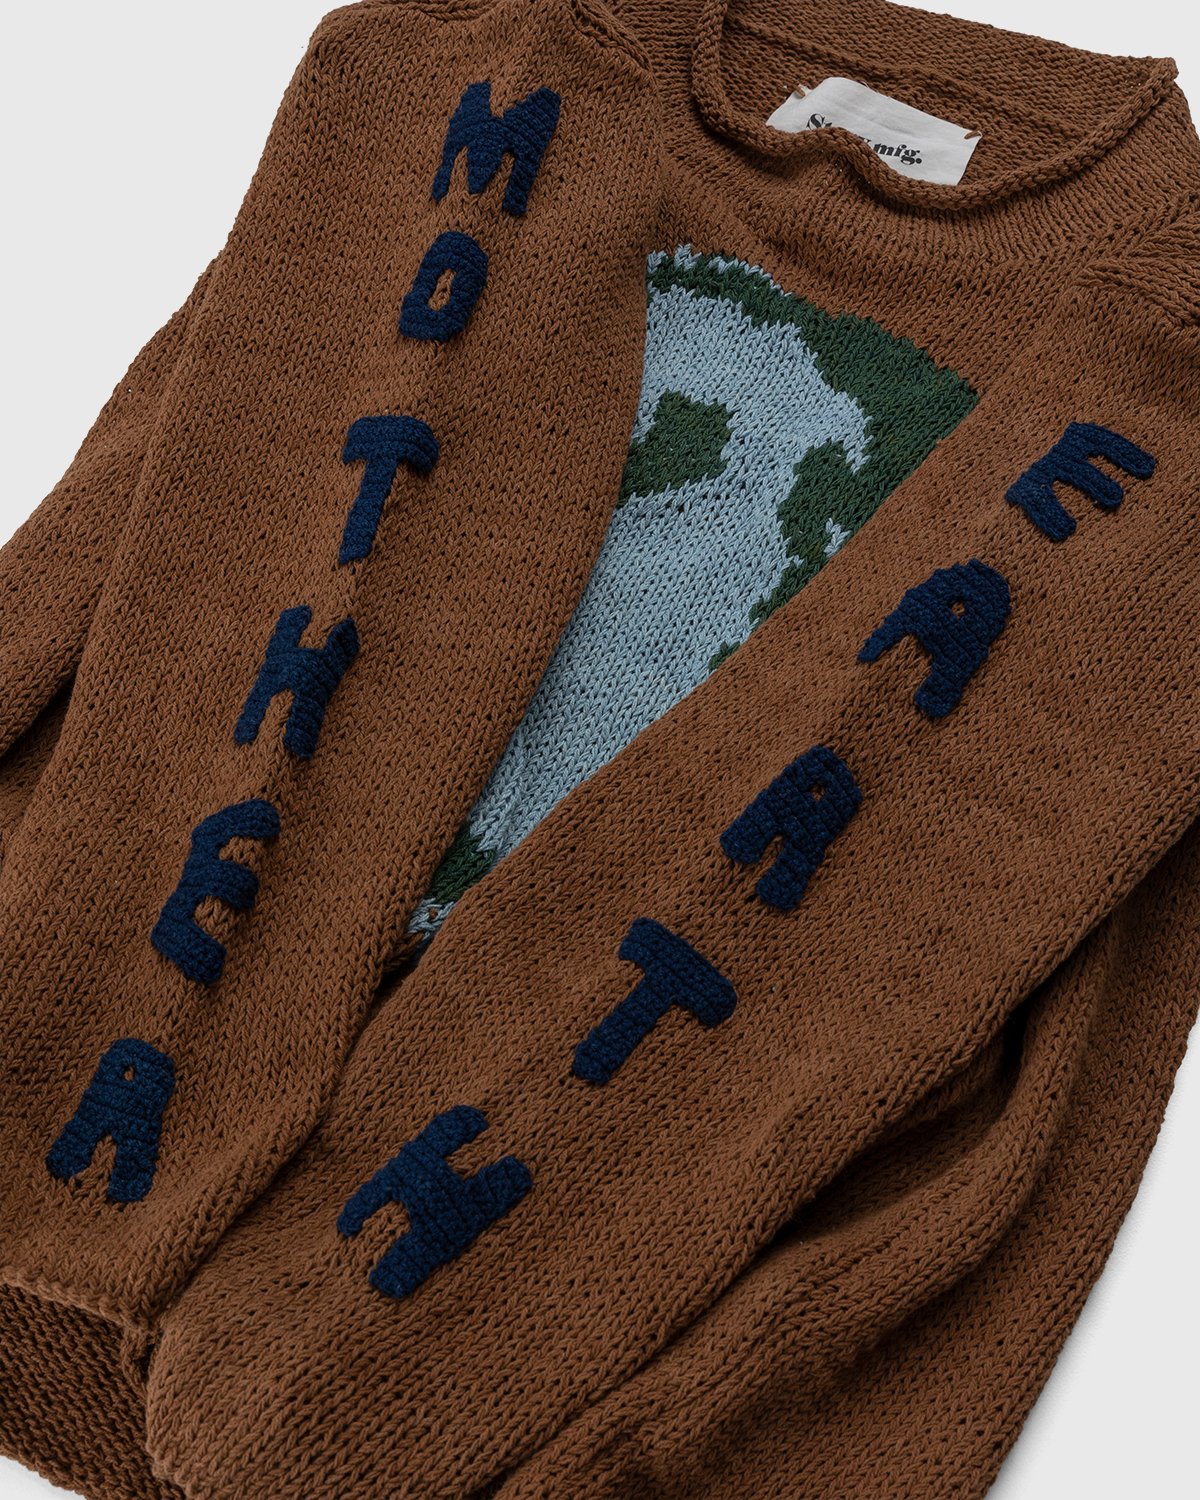 Story mfg. - Twinsun Rollneck Sweater Mother Earth Brown - Clothing - Brown - Image 6